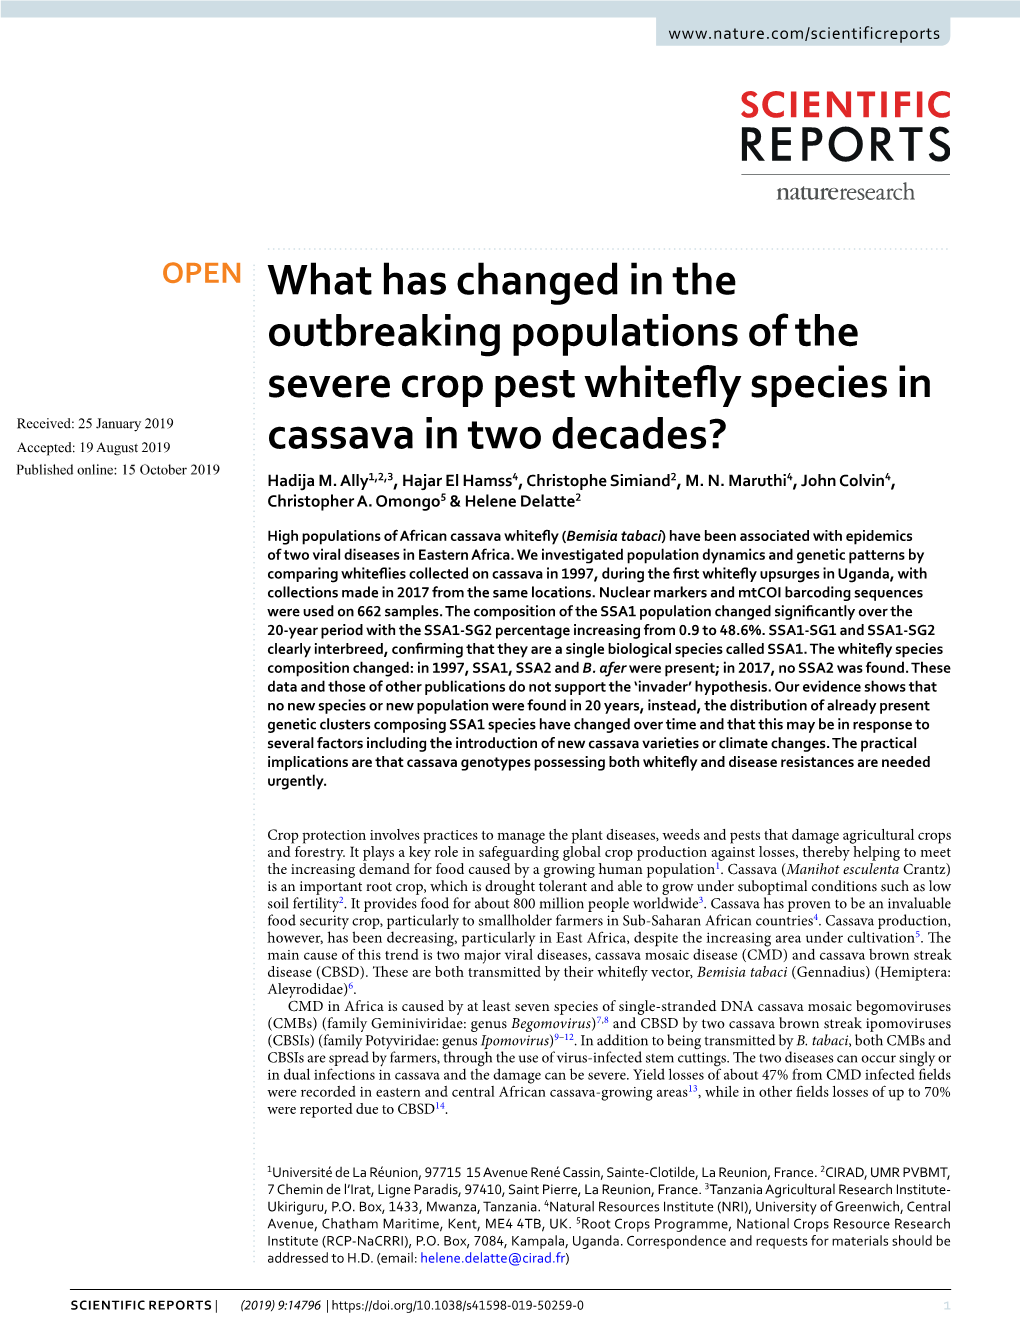 What Has Changed in the Outbreaking Populations of the Severe Crop Pest